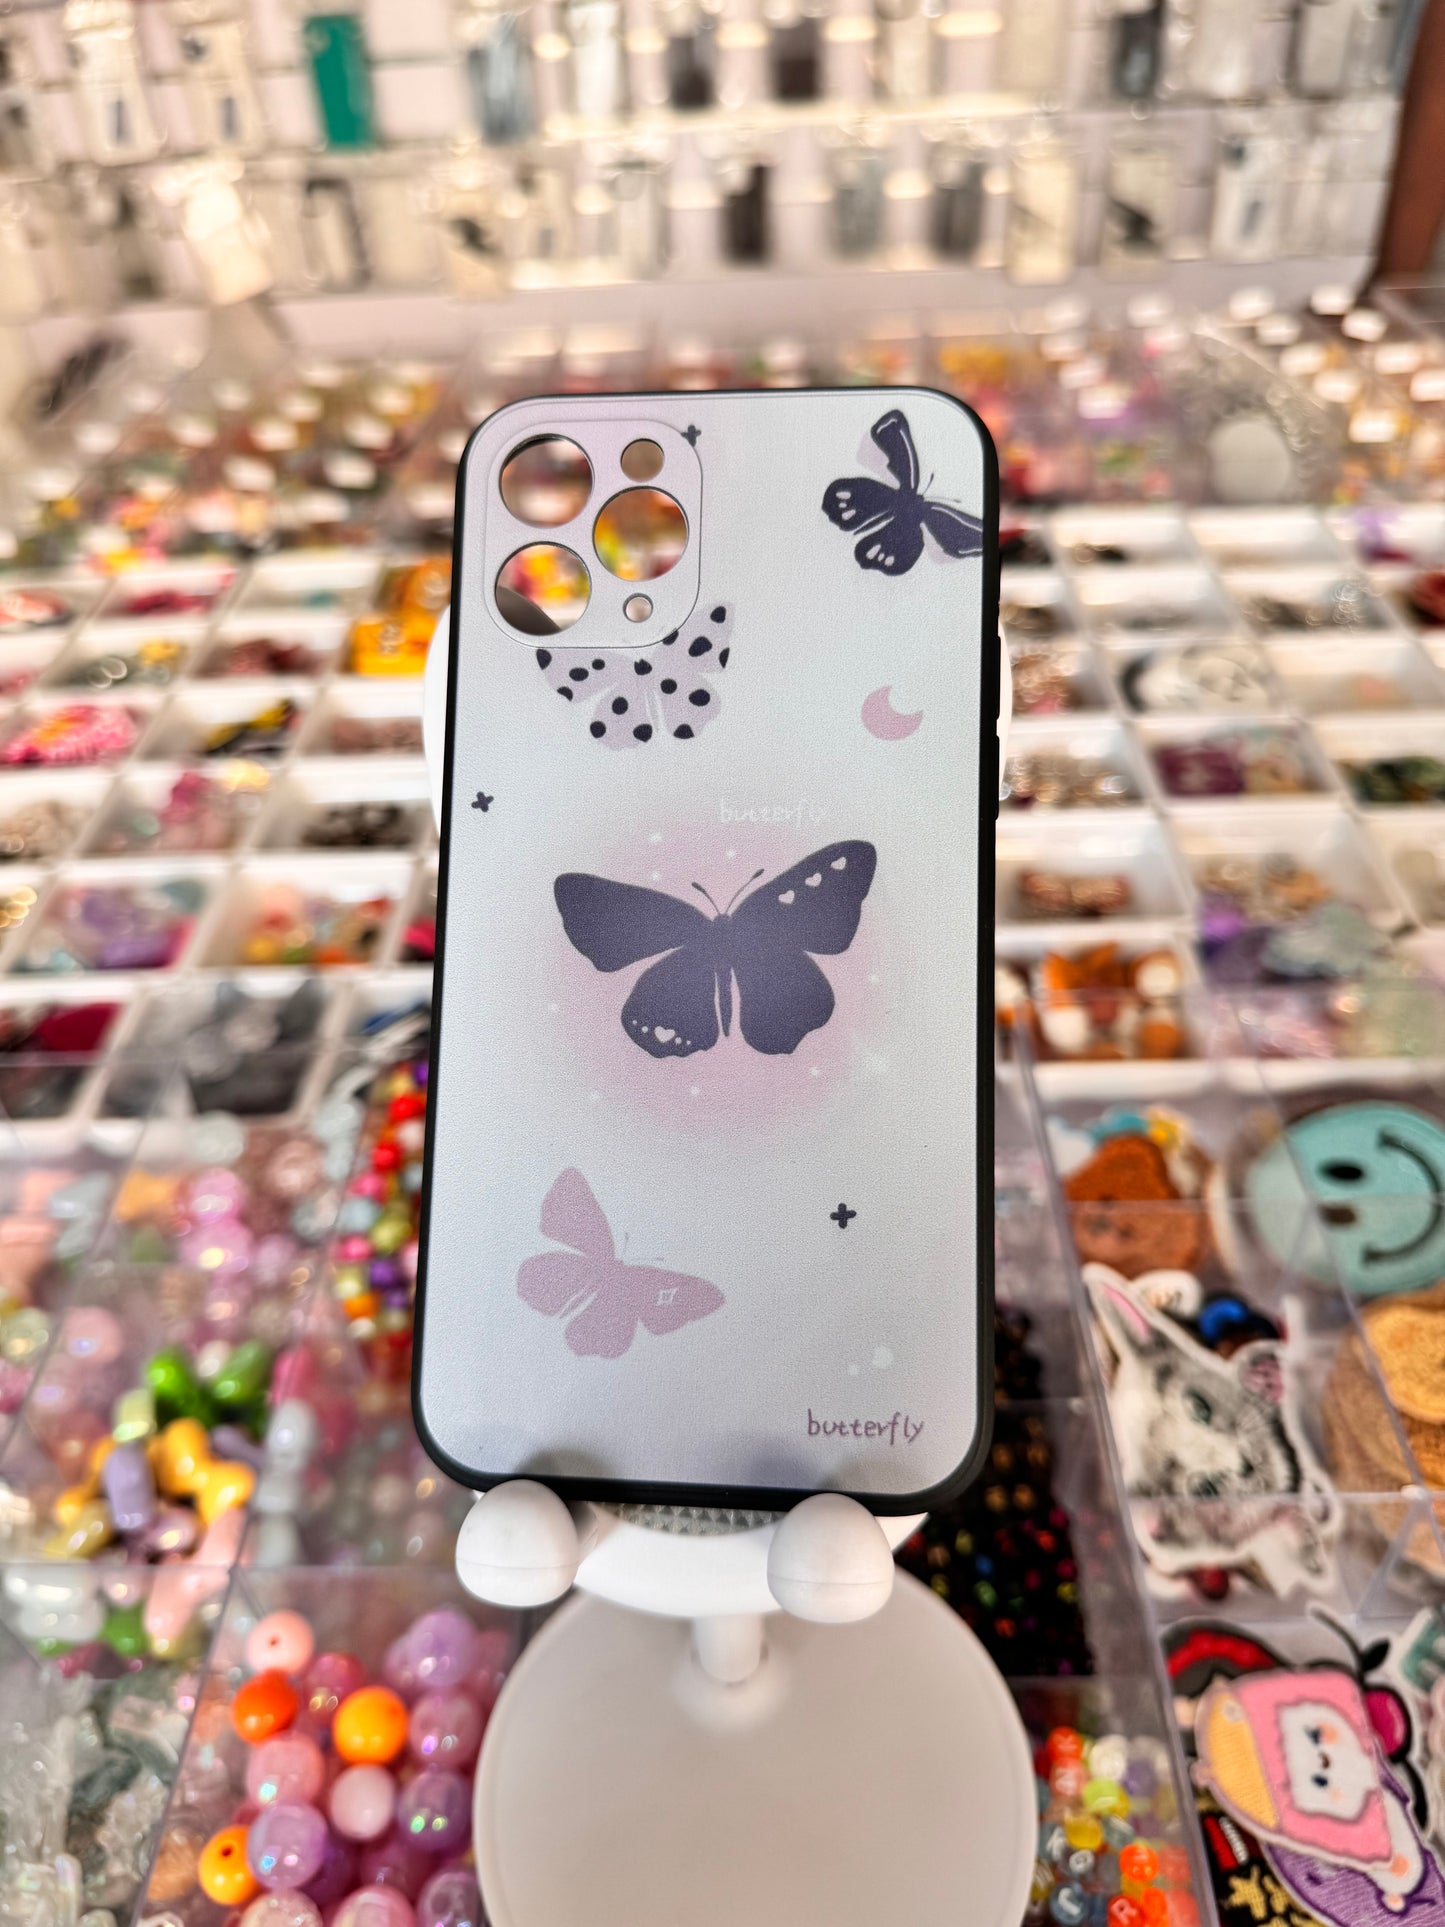 Butterfly case for iPhones